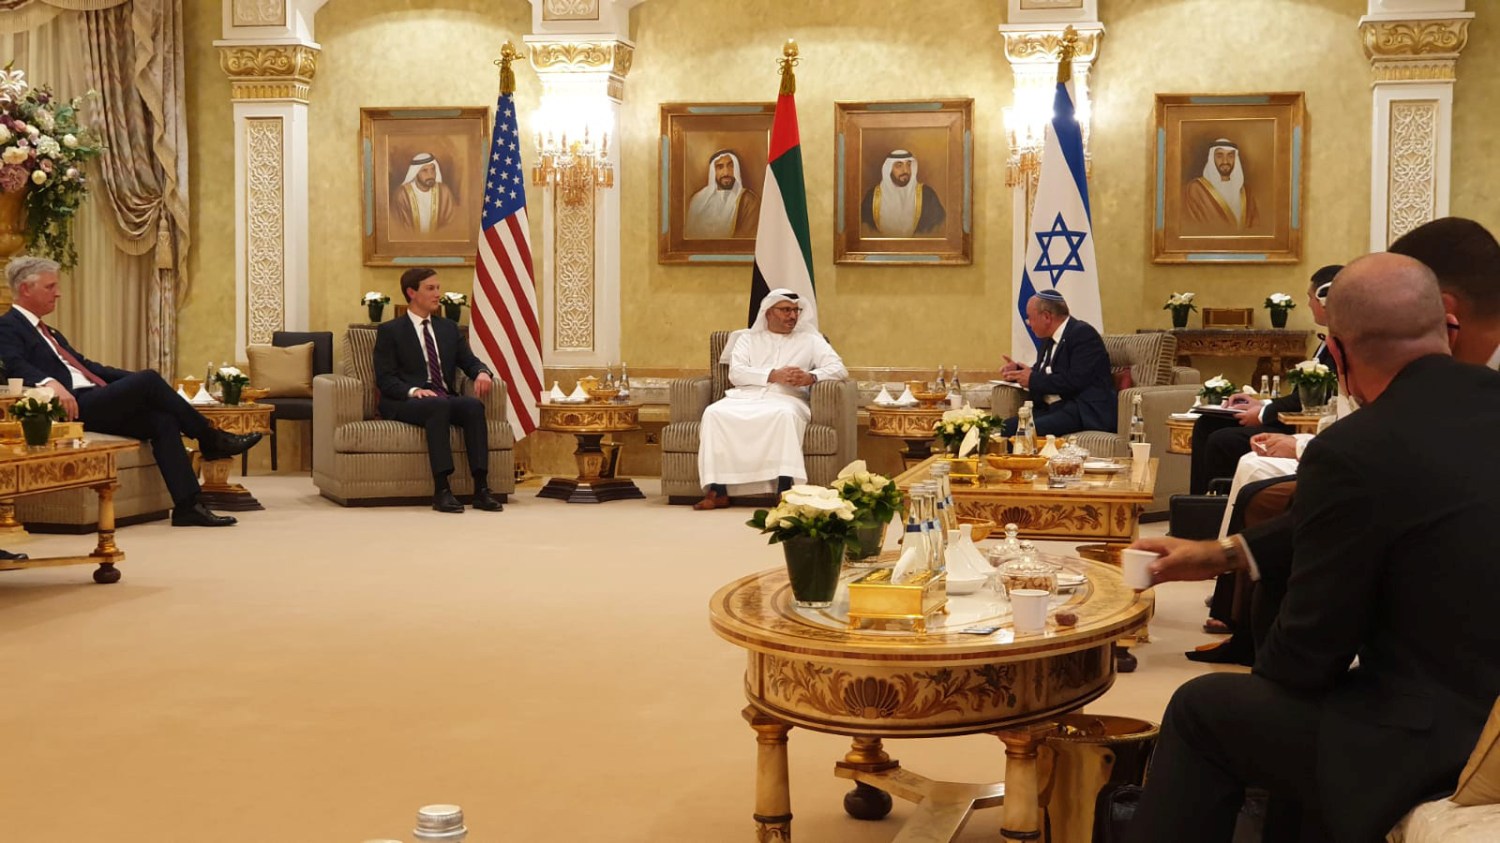 Israeli National Security Advisor Meir Ben-Shabbat, U.S. President's senior adviser Jared Kushner and Minister of State for Foreign Affairs Anwar Gargash hold a meeting in Abu Dhabi, United Arab Emirates August 31, 2020. Government Press Office (GPO)/Handout via REUTERS THIS IMAGE HAS BEEN SUPPLIED BY A THIRD PARTY